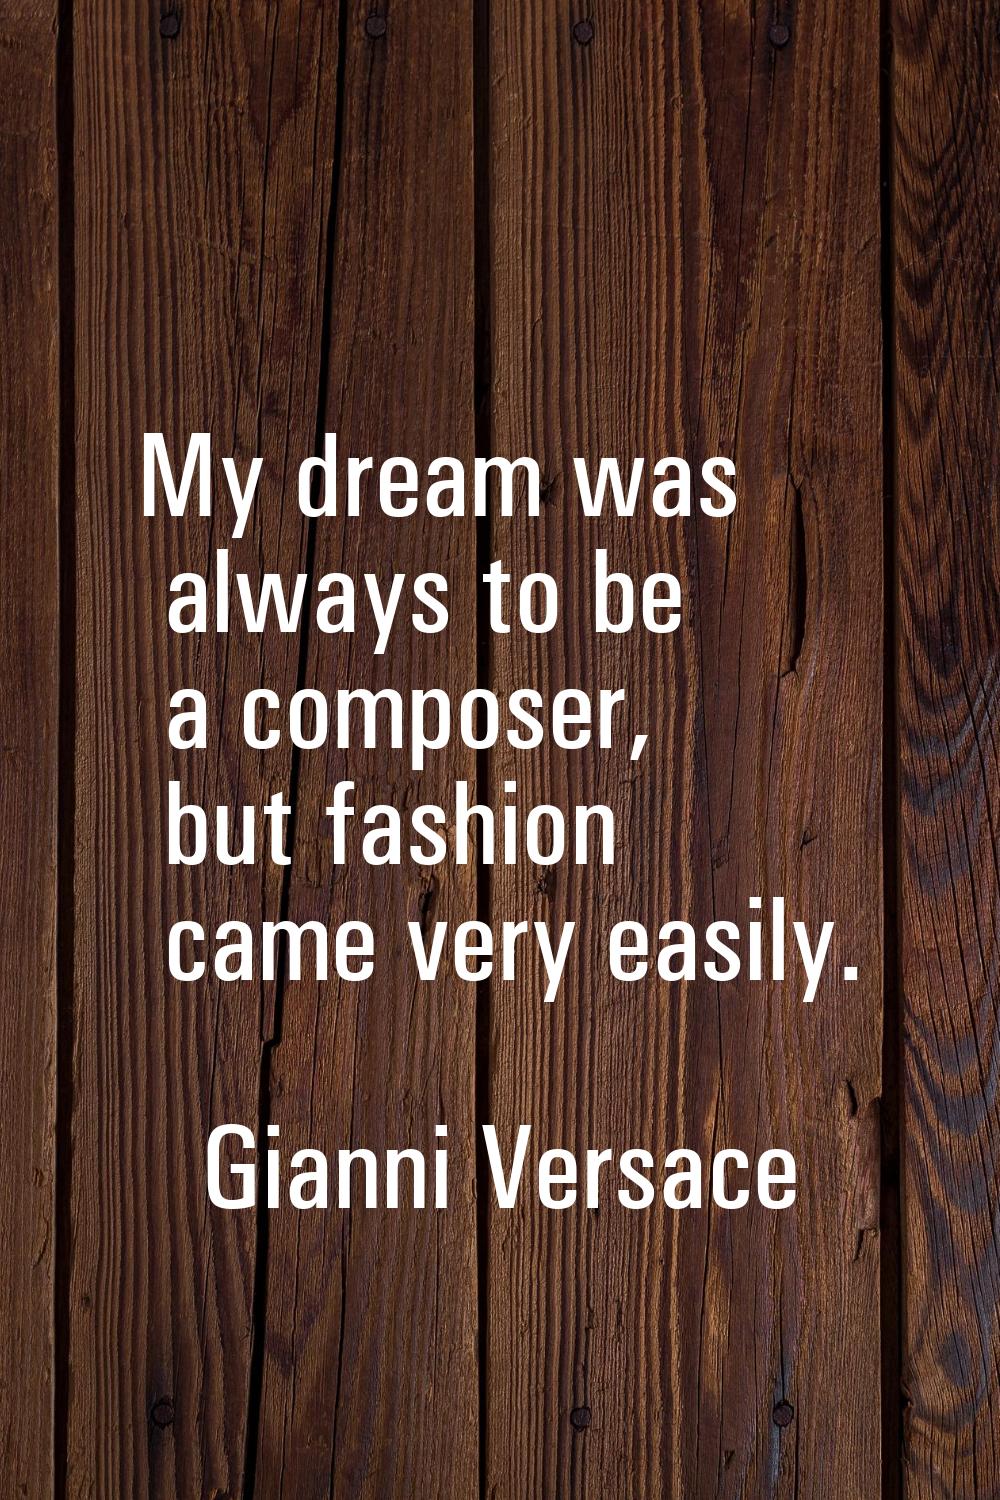 My dream was always to be a composer, but fashion came very easily.